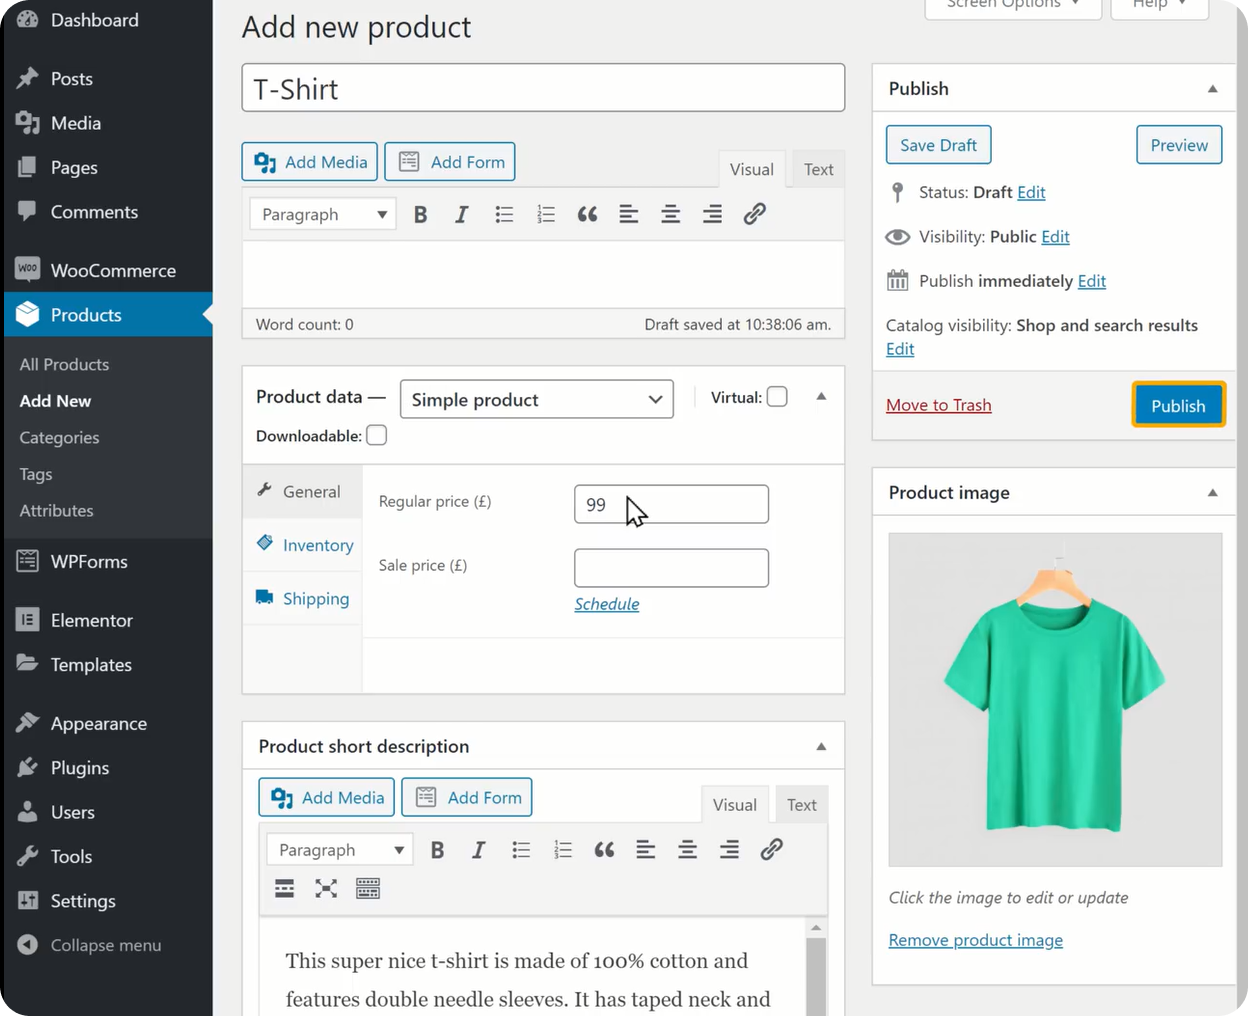 Publish to add product to the store